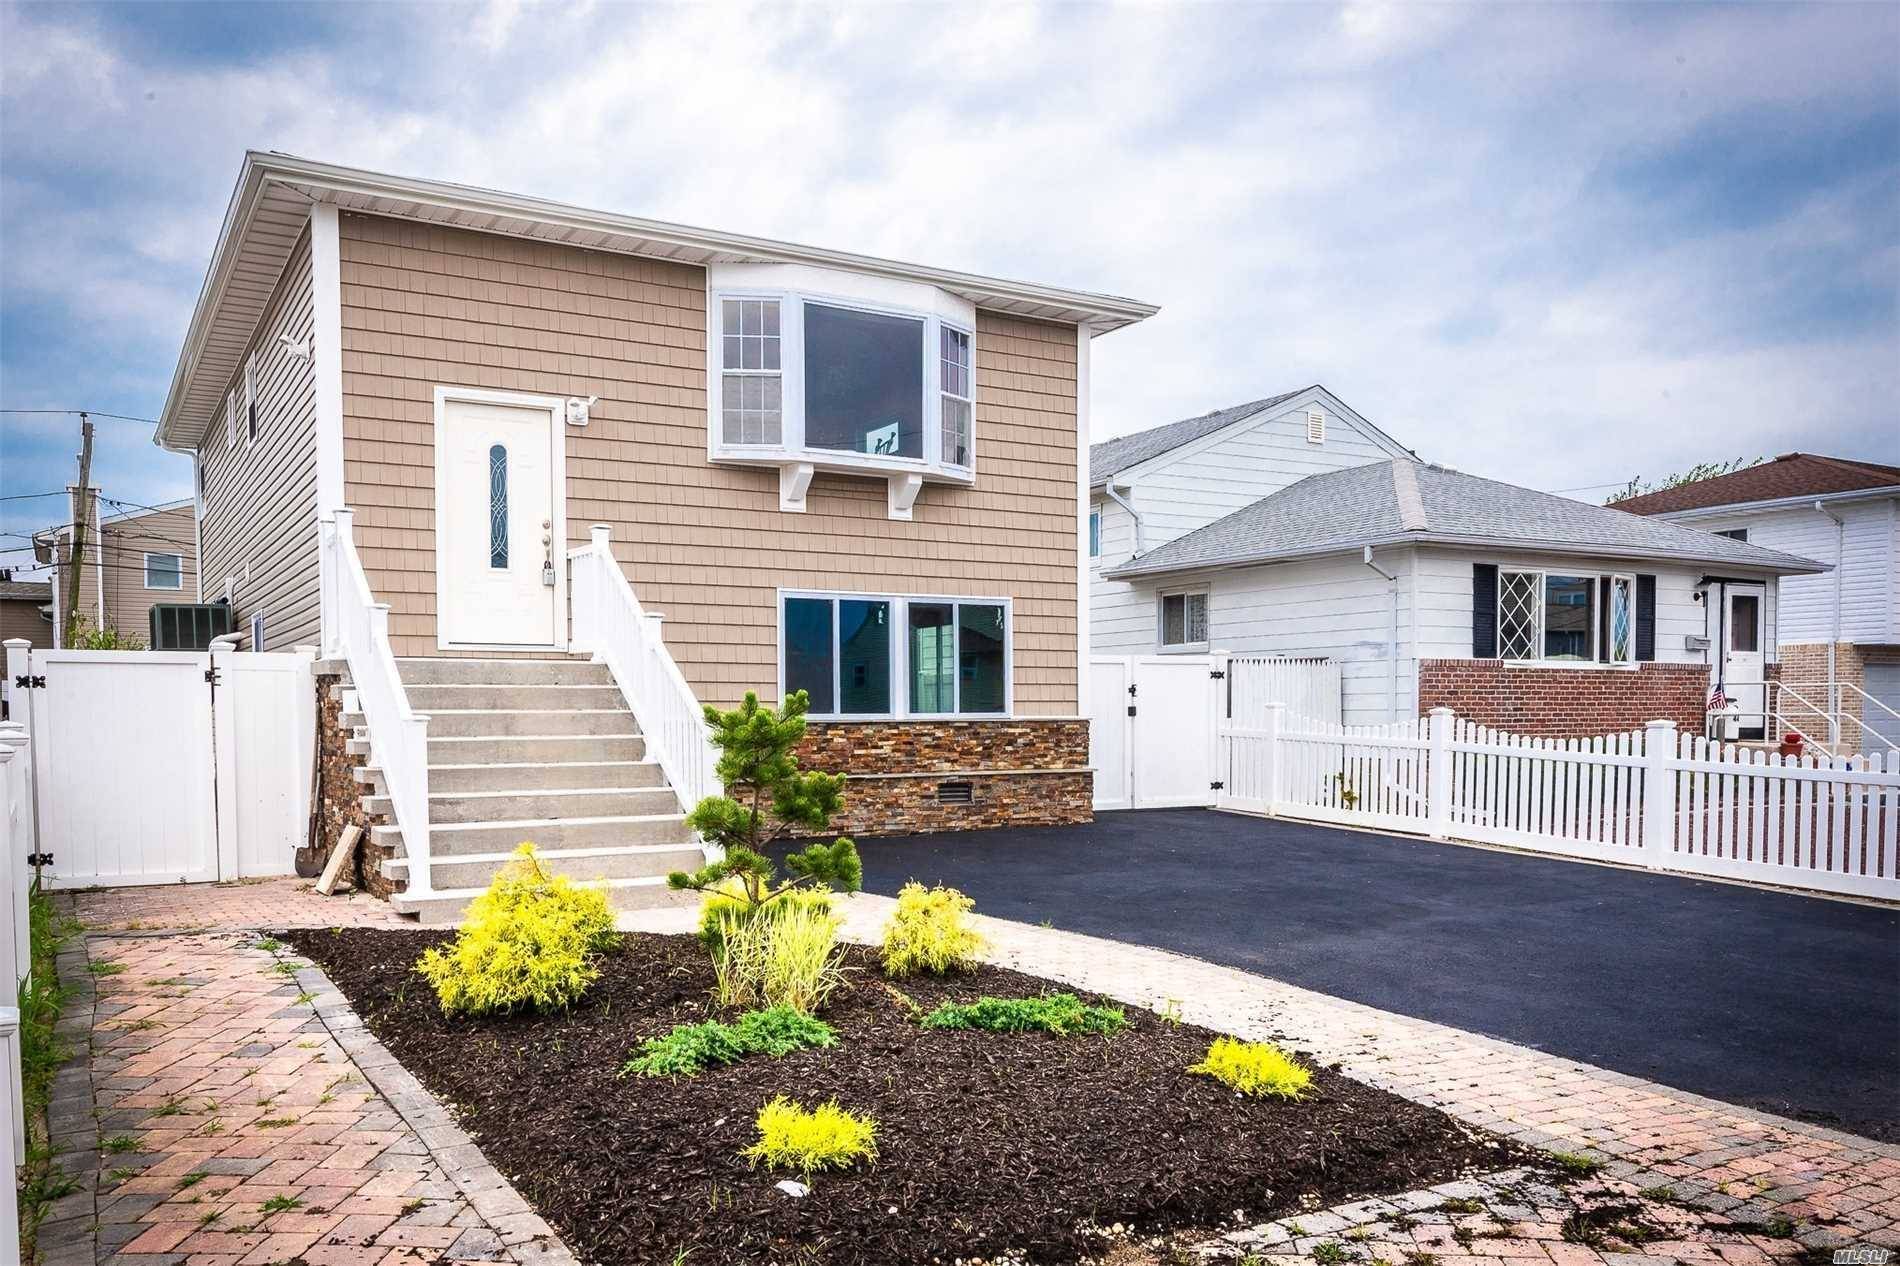 Completely Renovated, Gourmet Center Island Kitchen W/Quartz Tops, New Stainless Steel Appliances & Spa Bathroom W/Rain Showerhead And Jacuzzi Tub.